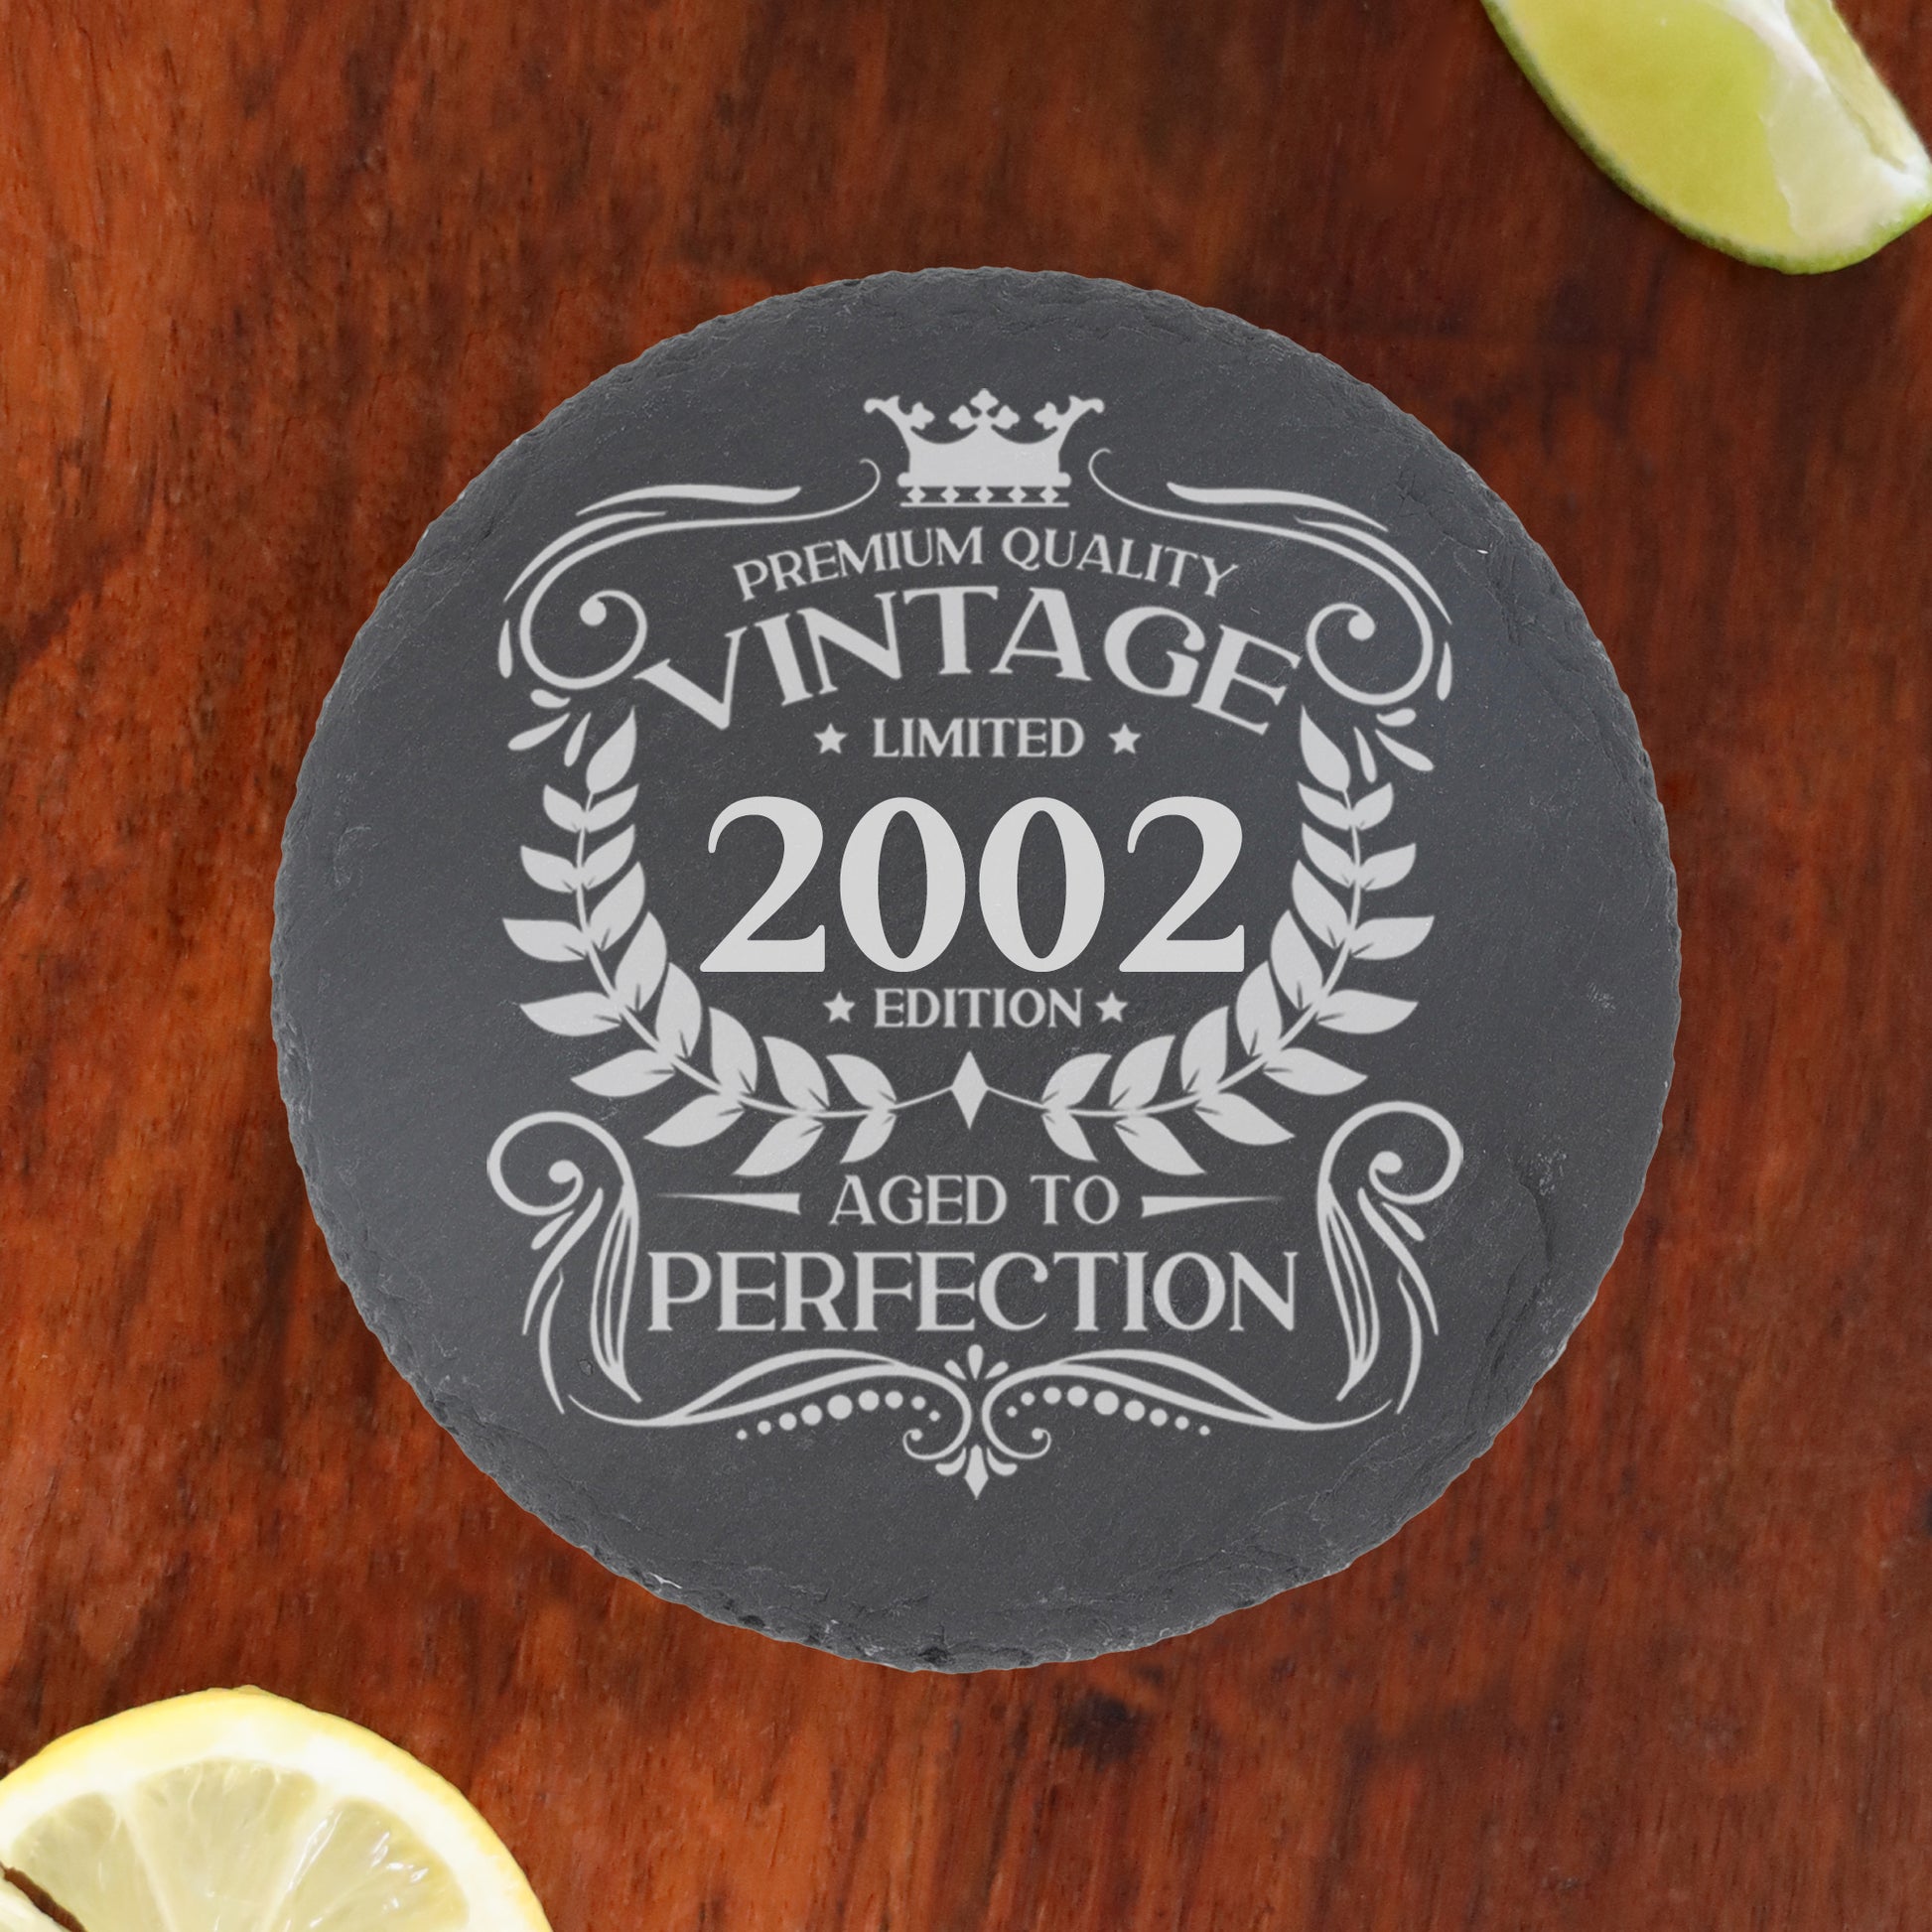 Vintage 2002 21st Birthday Engraved Beer Pint Glass Gift  - Always Looking Good - Round Coaster Only  